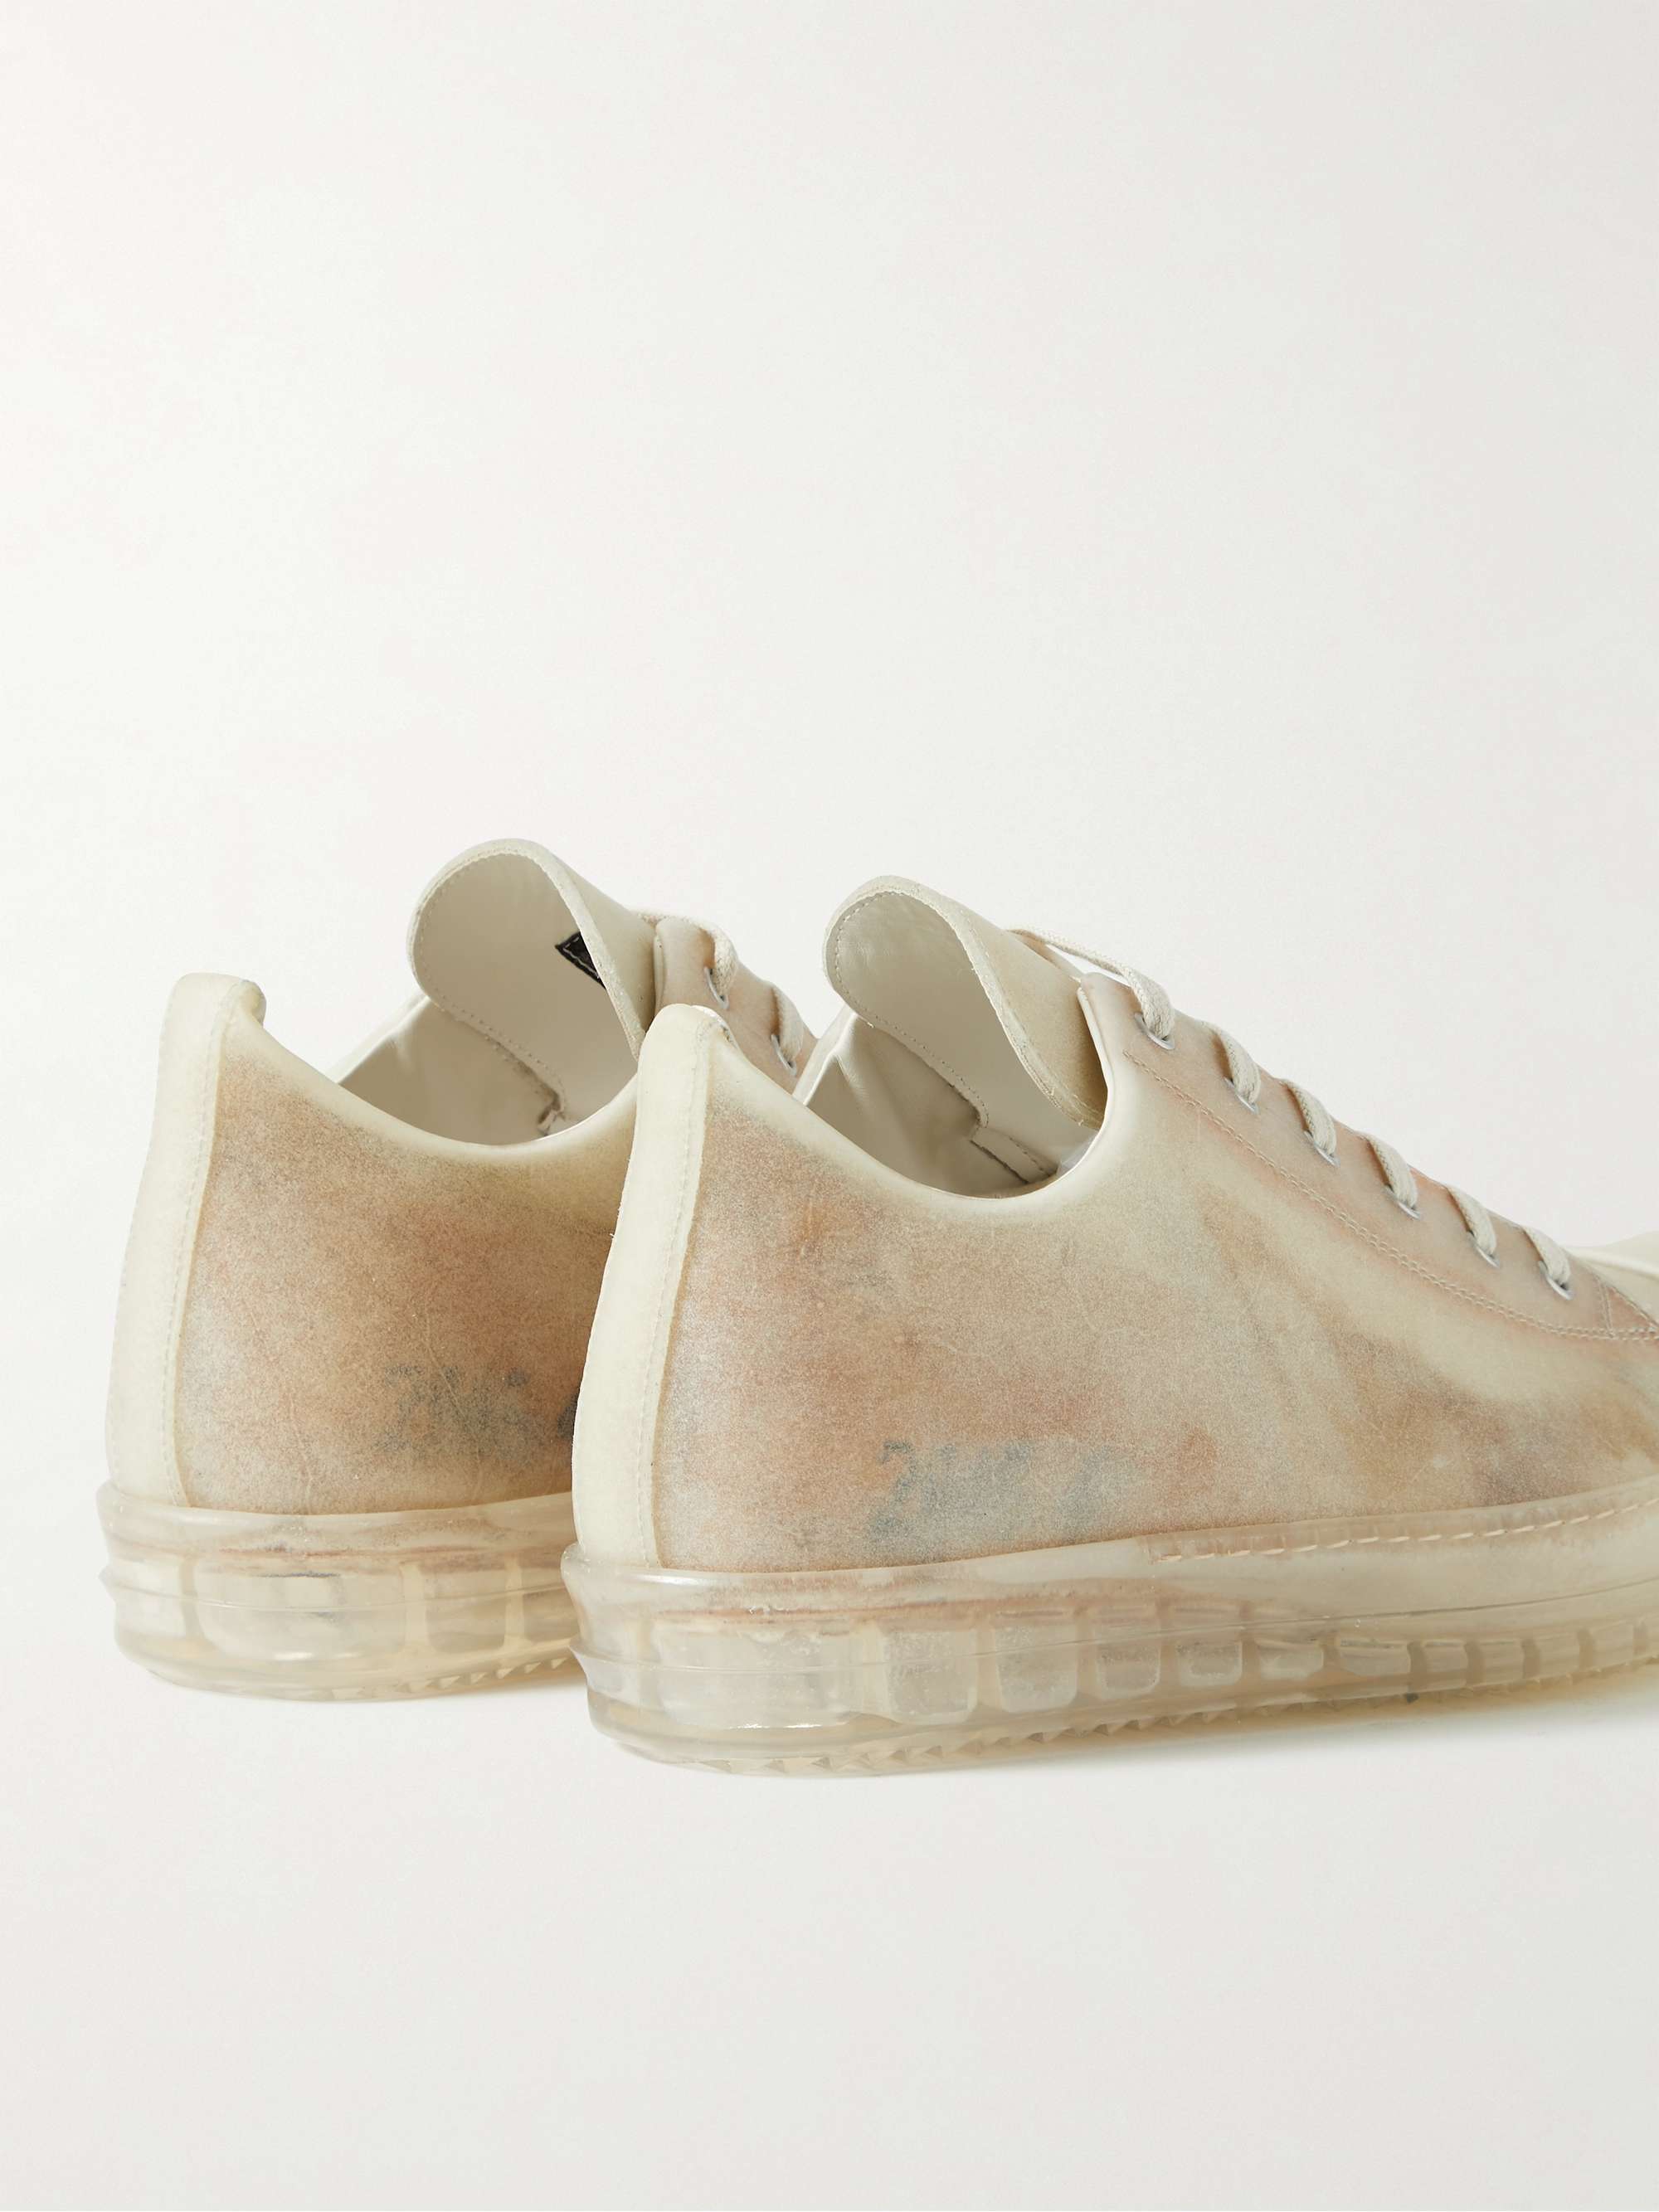 RICK OWENS Leather-Trimmed Rubber Sneakers